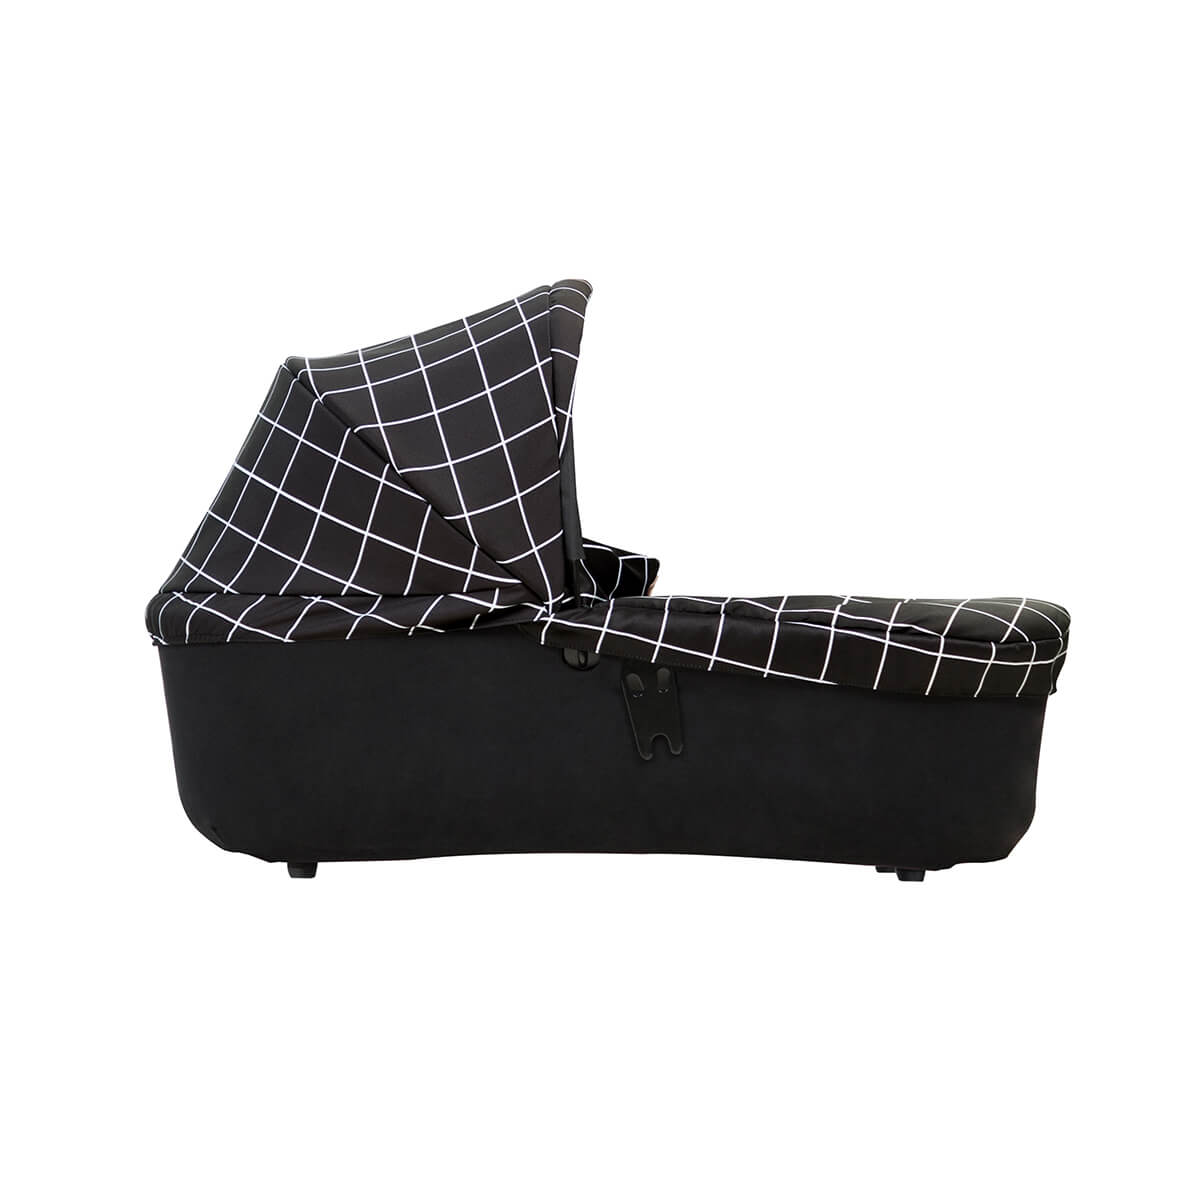 mountain buggy duet carrycot plus in lie flat mode side view shown in color grid_grid